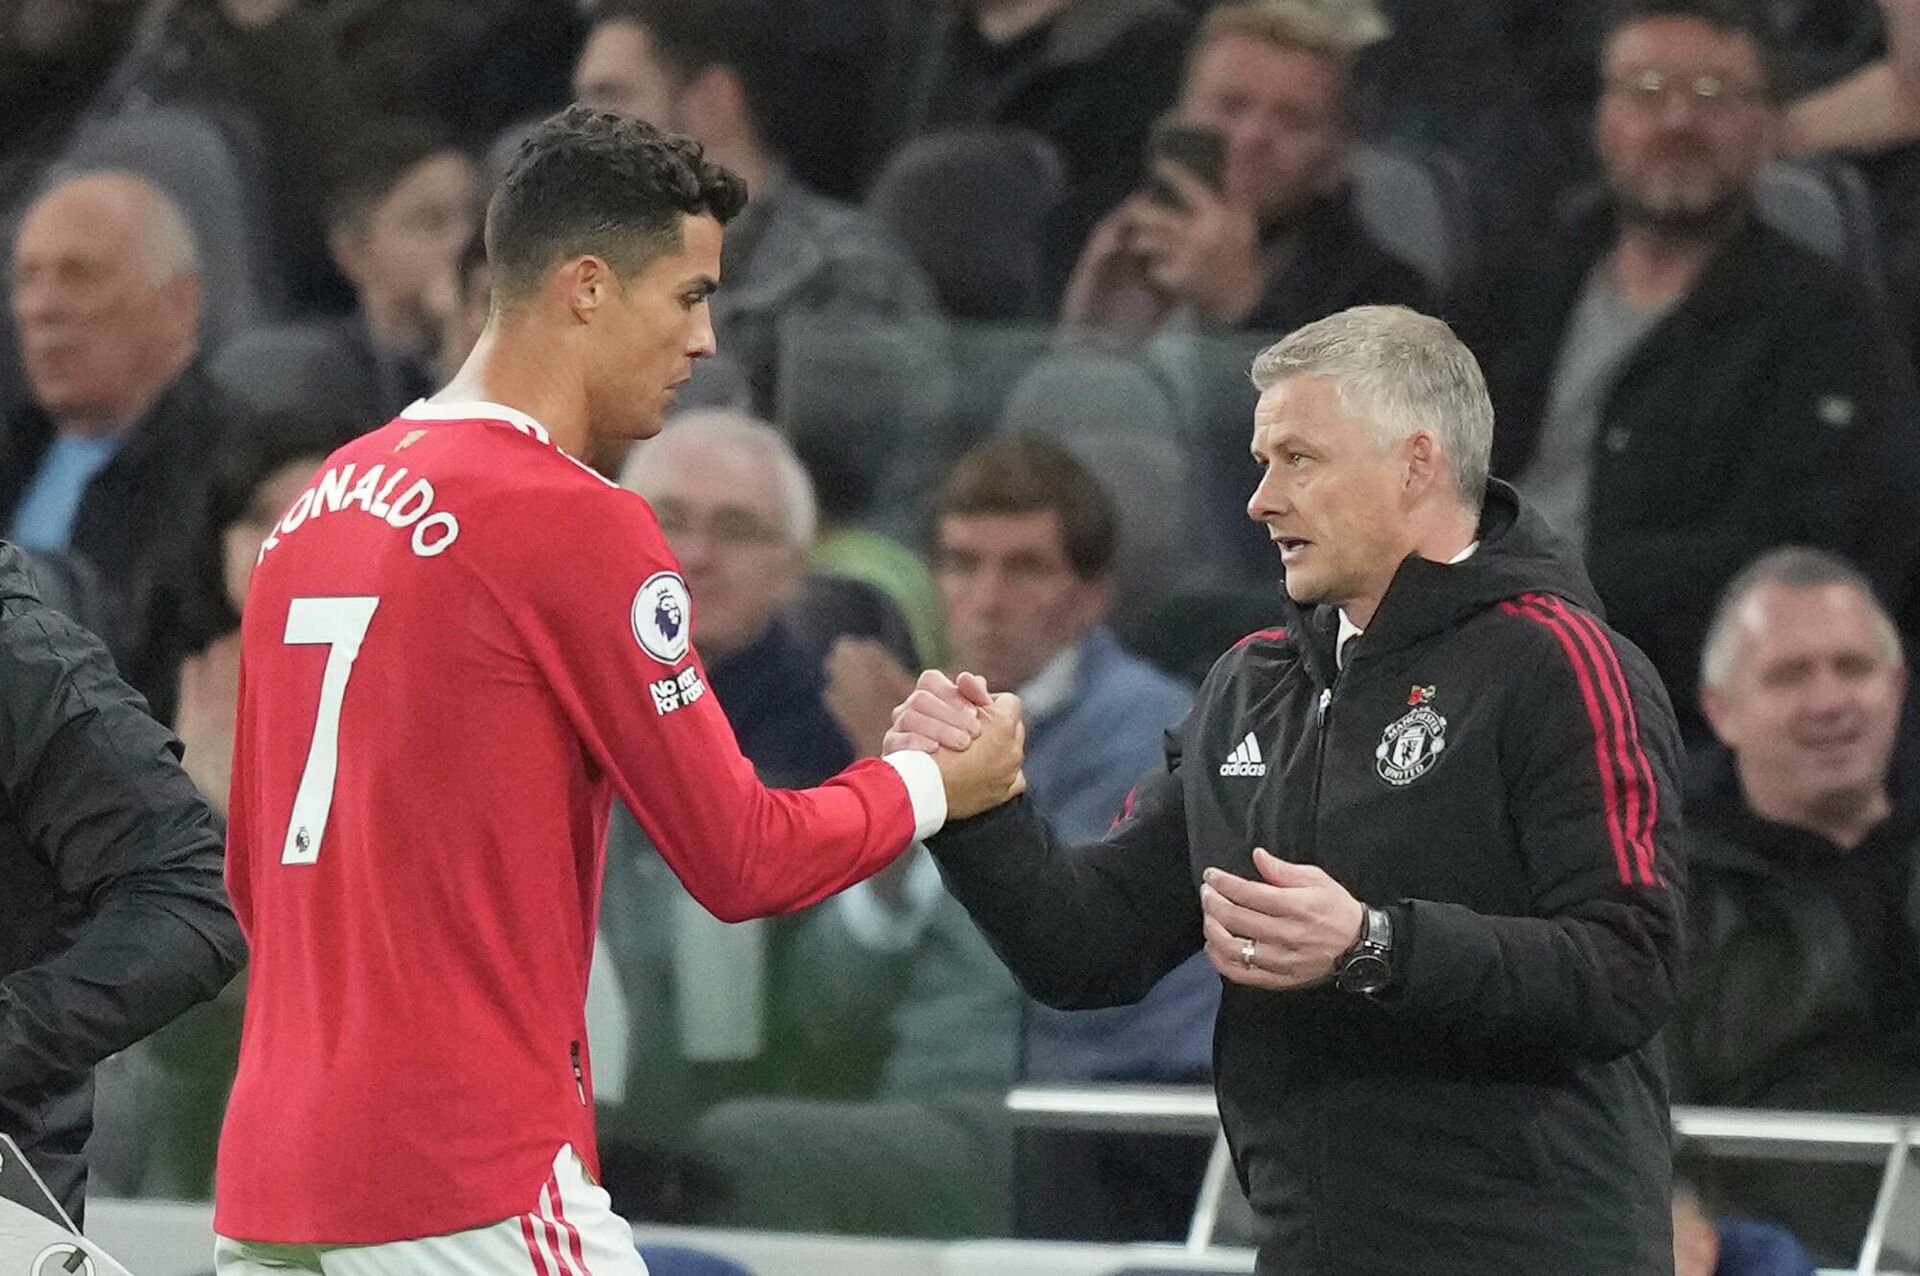 Manchester United's Cristiano Ronaldo, left, greets Manchester United's manager Ole Gunnar Solskjaer as he is replaced by Manchester United's Marcus Rashford during the English Premier League soccer match between Tottenham Hotspur and Manchester United at the Tottenham Hotspur Stadium in London, Saturday, Oct. 30, 2021 - Sputnik International, 1920, 22.11.2021